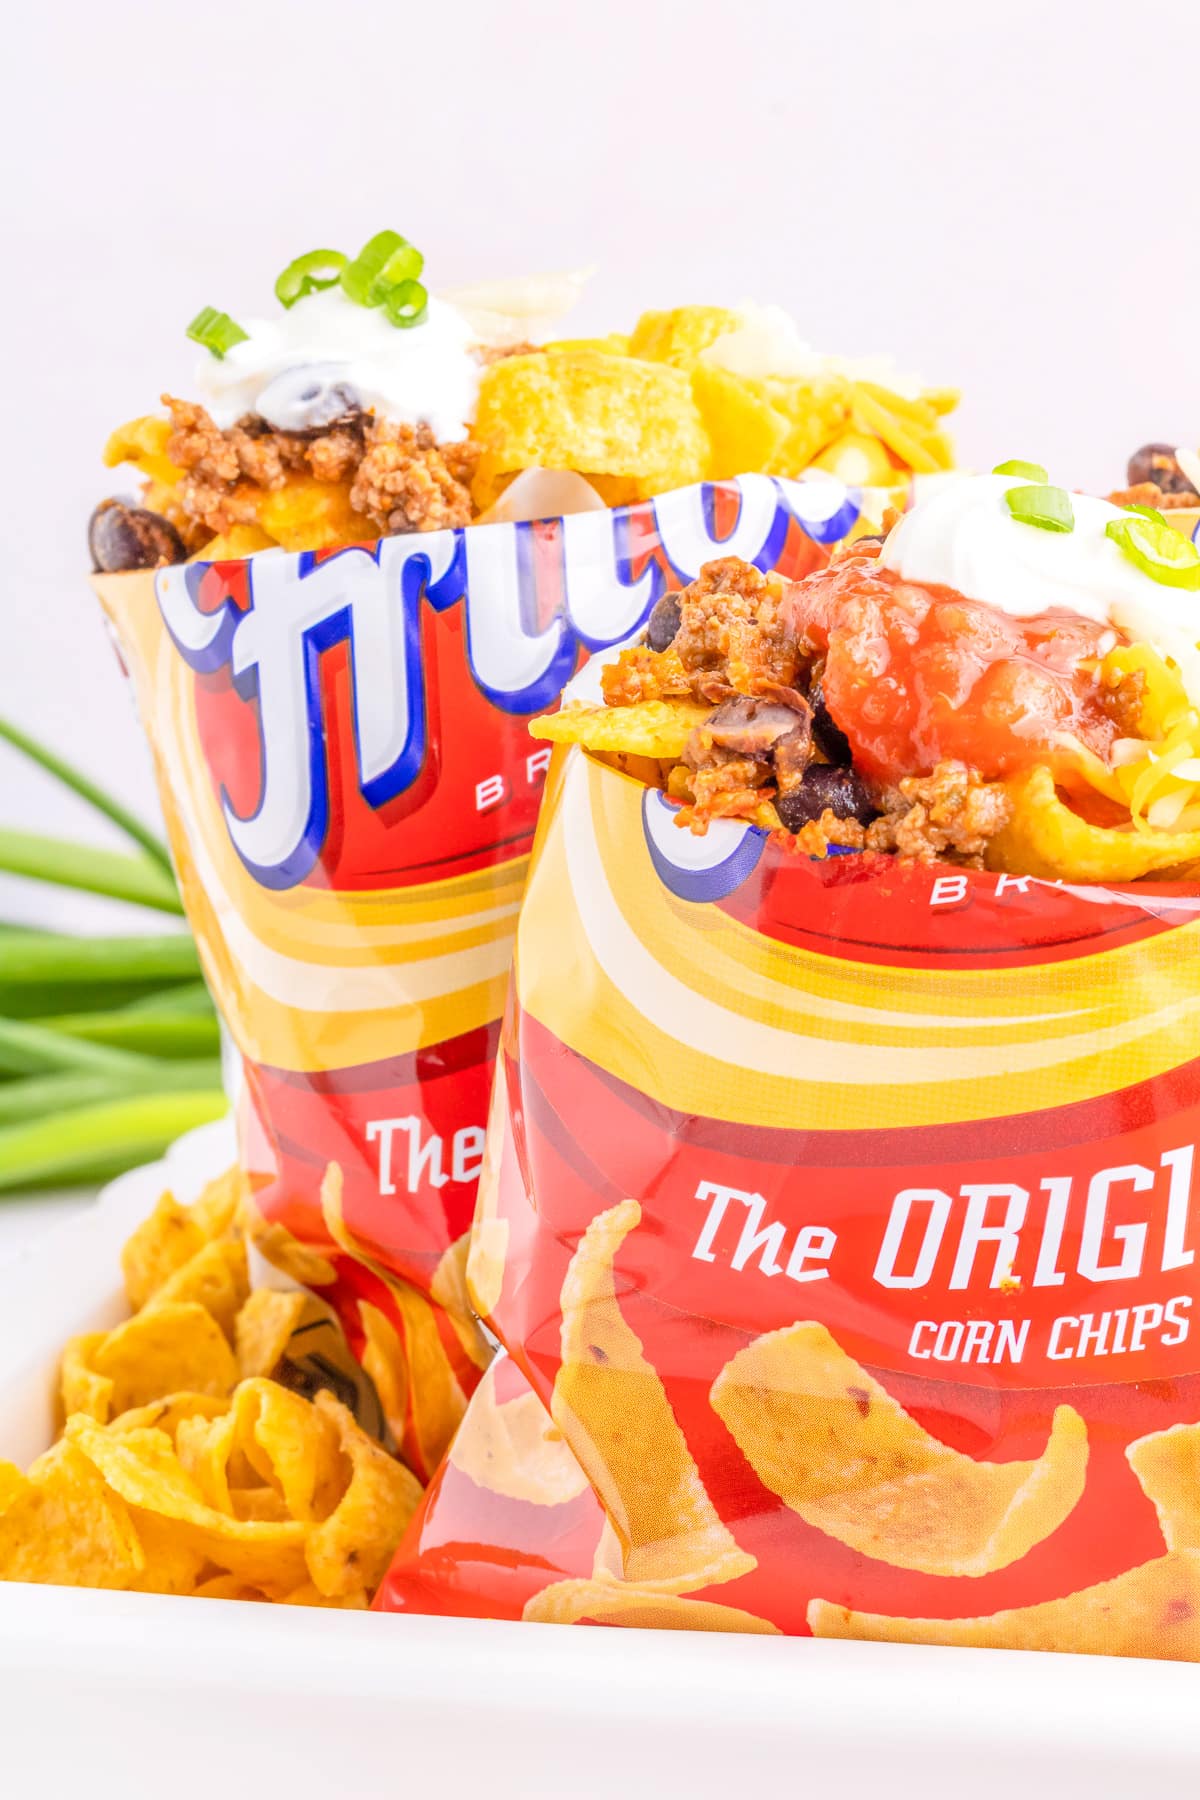 Two bags of Fritos corn chips wit the tops of the bags folded back full of taco meat, salsa and sour cream on top of the chips.